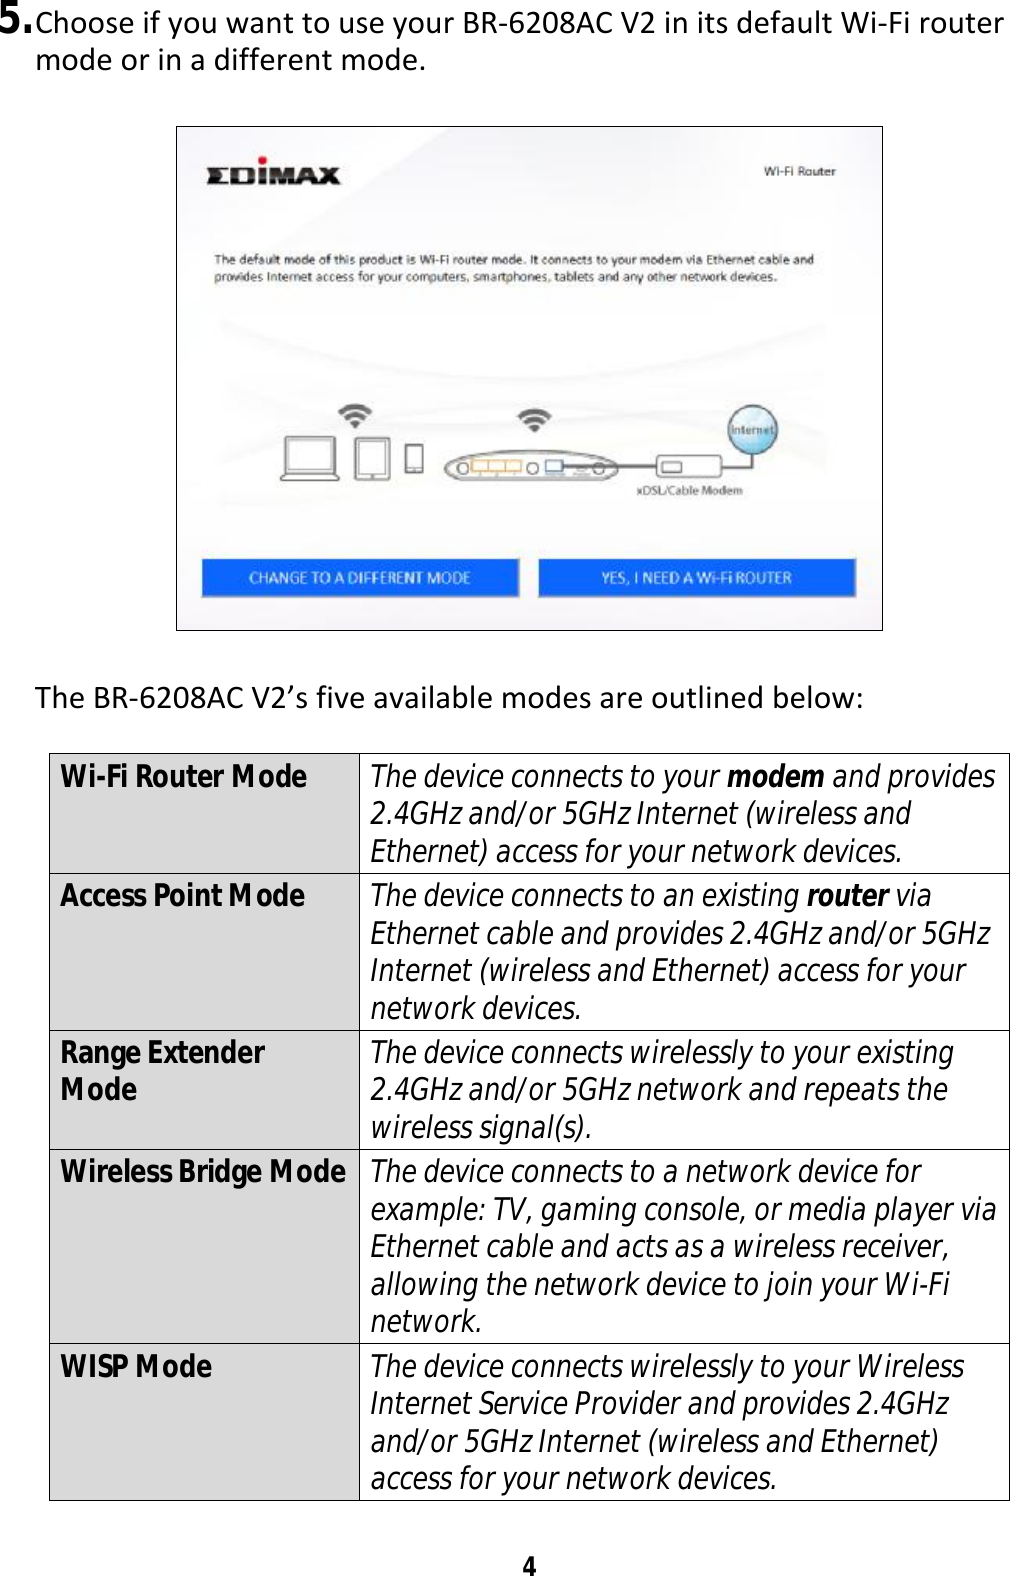 4  5. Choose if you want to use your BR-6208AC V2 in its default Wi-Fi router mode or in a different mode.    The BR-6208AC V2’s five available modes are outlined below:  Wi-Fi Router Mode  The device connects to your modem and provides 2.4GHz and/or 5GHz Internet (wireless and Ethernet) access for your network devices. Access Point Mode  The device connects to an existing router via Ethernet cable and provides 2.4GHz and/or 5GHz Internet (wireless and Ethernet) access for your network devices. Range Extender Mode  The device connects wirelessly to your existing 2.4GHz and/or 5GHz network and repeats the wireless signal(s). Wireless Bridge Mode The device connects to a network device for example: TV, gaming console, or media player via Ethernet cable and acts as a wireless receiver, allowing the network device to join your Wi-Fi network. WISP Mode  The device connects wirelessly to your Wireless Internet Service Provider and provides 2.4GHz and/or 5GHz Internet (wireless and Ethernet) access for your network devices.  